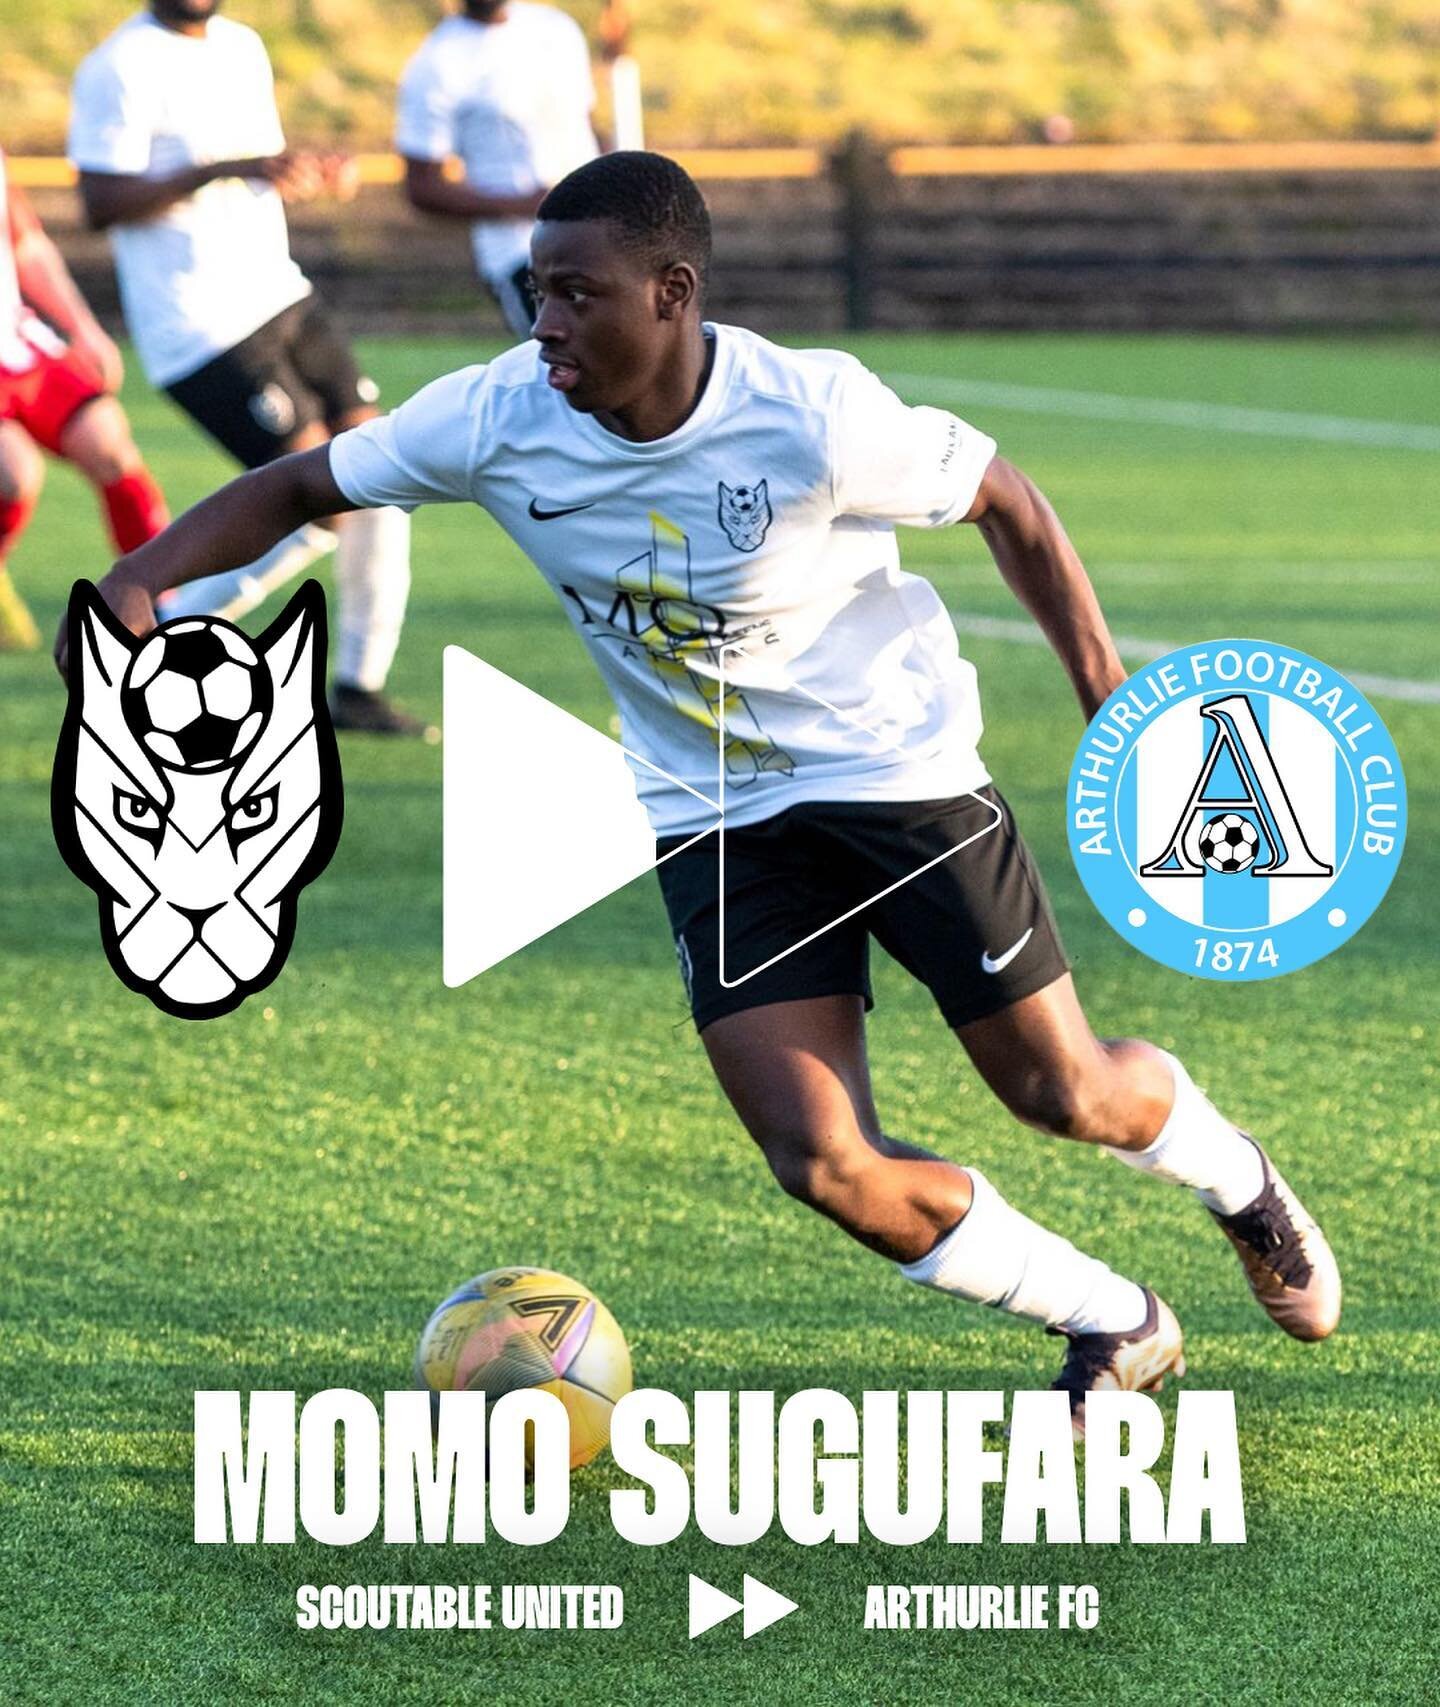 📝SIGNING ANNOUNCEMENT📝

Congratulations to our graduate player Momo Sugufara on signing a deal with Arthurlie FC who are in West of Scotland Premier Division.

Momo was spotted while playing in our showcase match last month -  impressing their coac